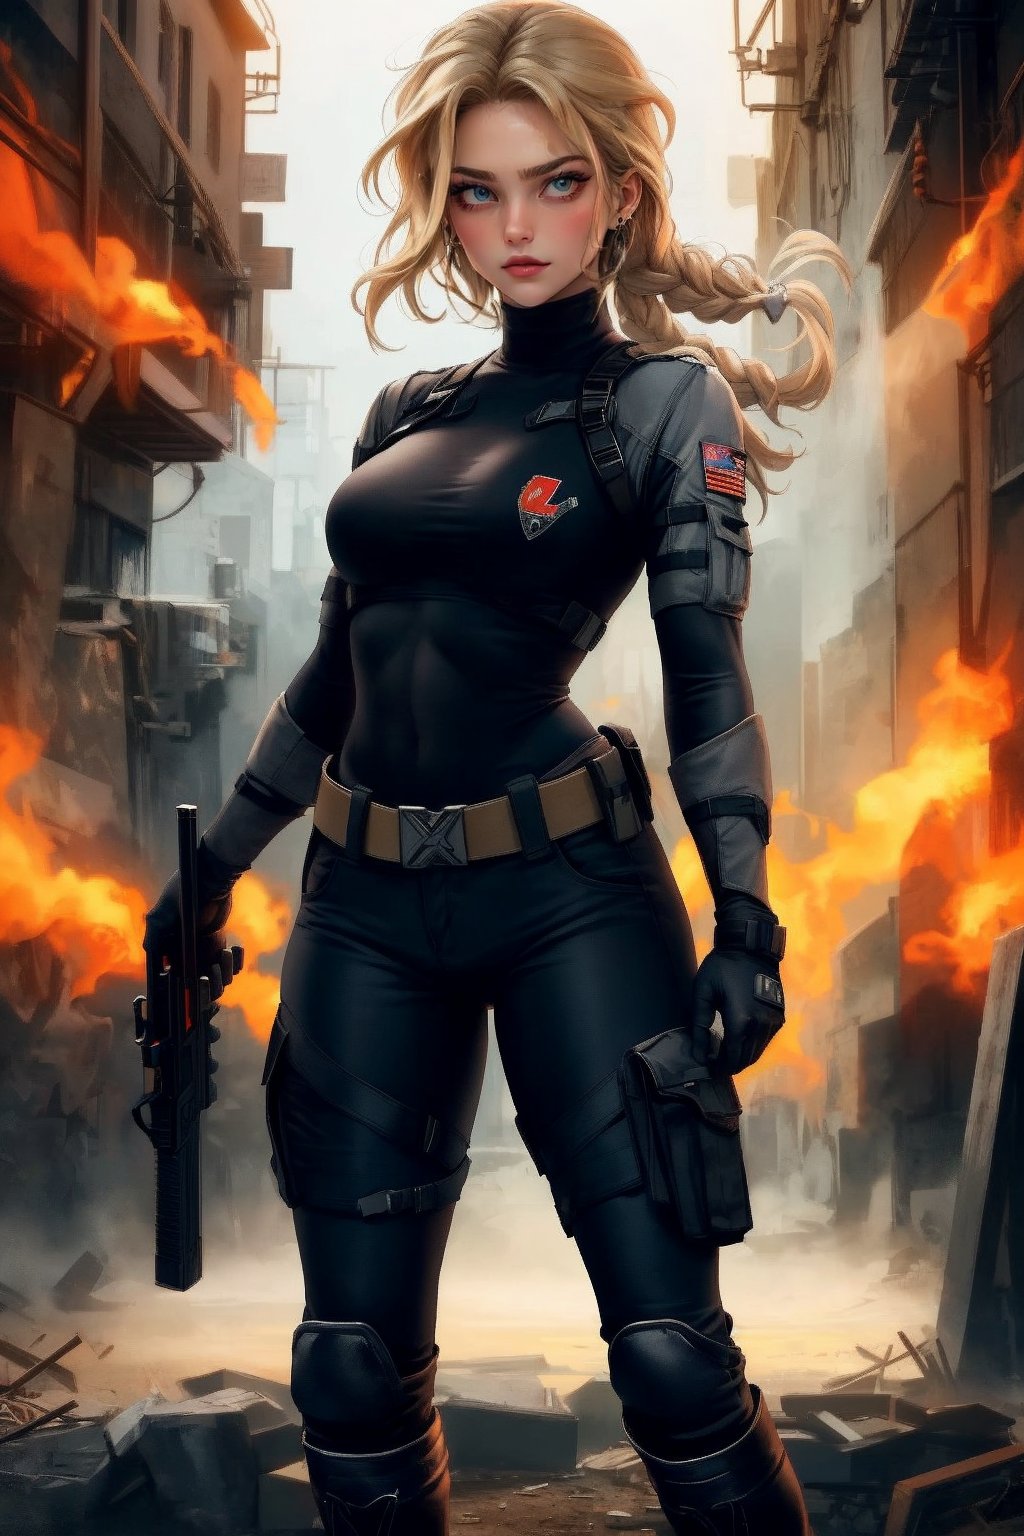 A captivating image of a strikingly beautiful woman, portrayed as a confident soldier. Her piercing blue eyes and full lips convey allure, while her long blonde hair is neatly braided, adorned with strong highlights. She is dressed in cargo pants and combat boots, equipped with various weapons and wearing black gloves. The full-body depiction showcases her in tactical gear, exuding strength and resilience. This high-quality image, whether a painting or a photograph, captures her allure and formidable presence, immersing viewers in her captivating portrayal. She wears a serious, stern, cold expression. Glaring eyes, furrowed eyebrows